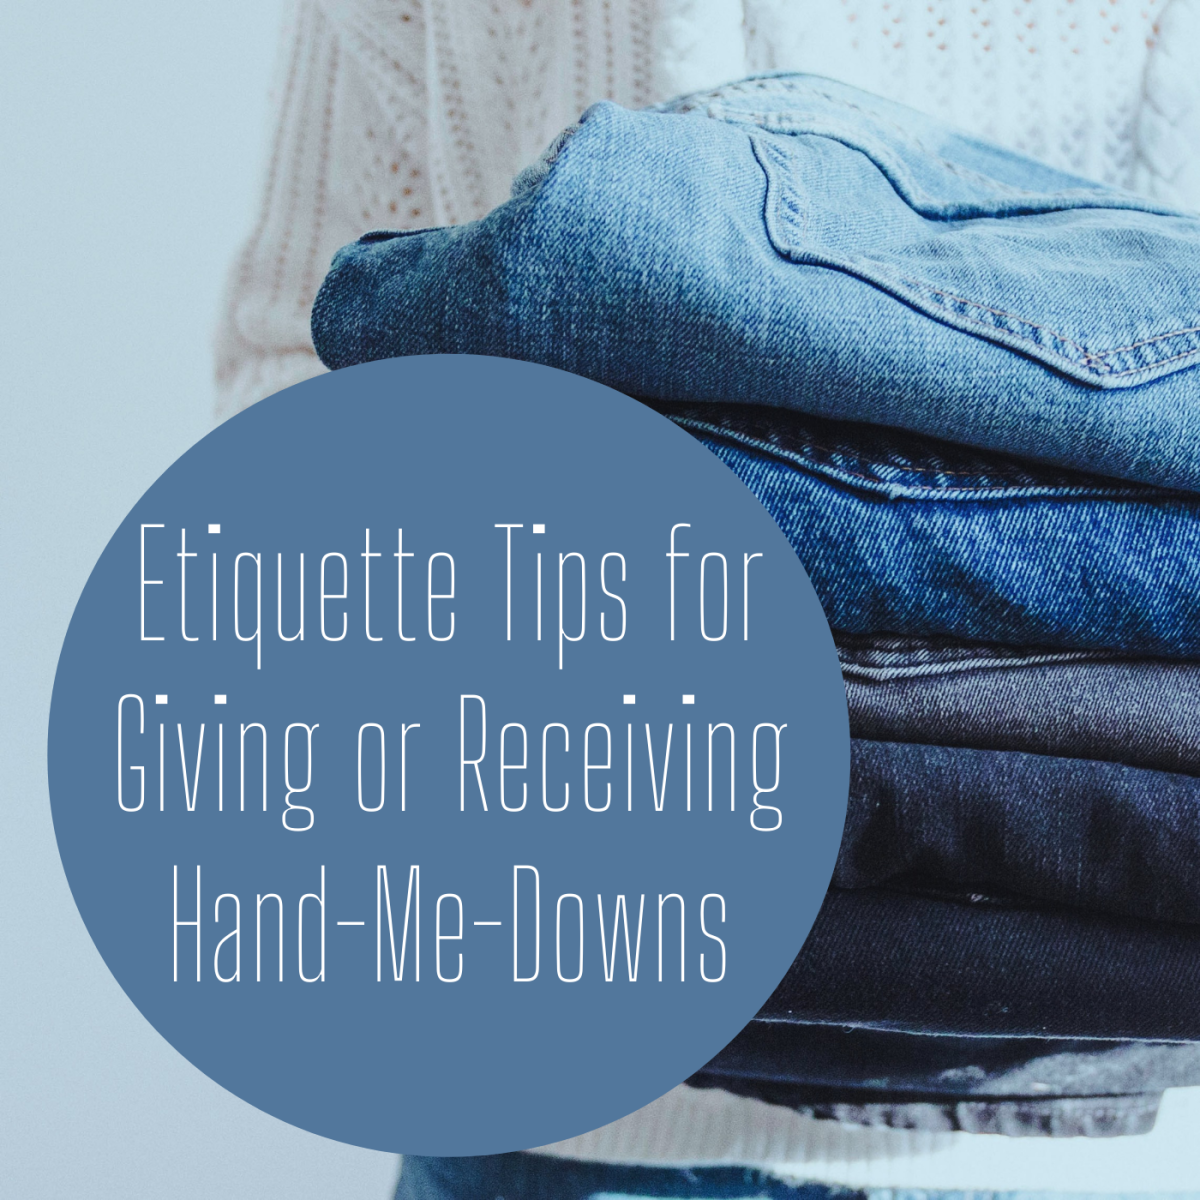 Learn how to gracefully give or accept a gift of hand-me-down clothing or other used items.